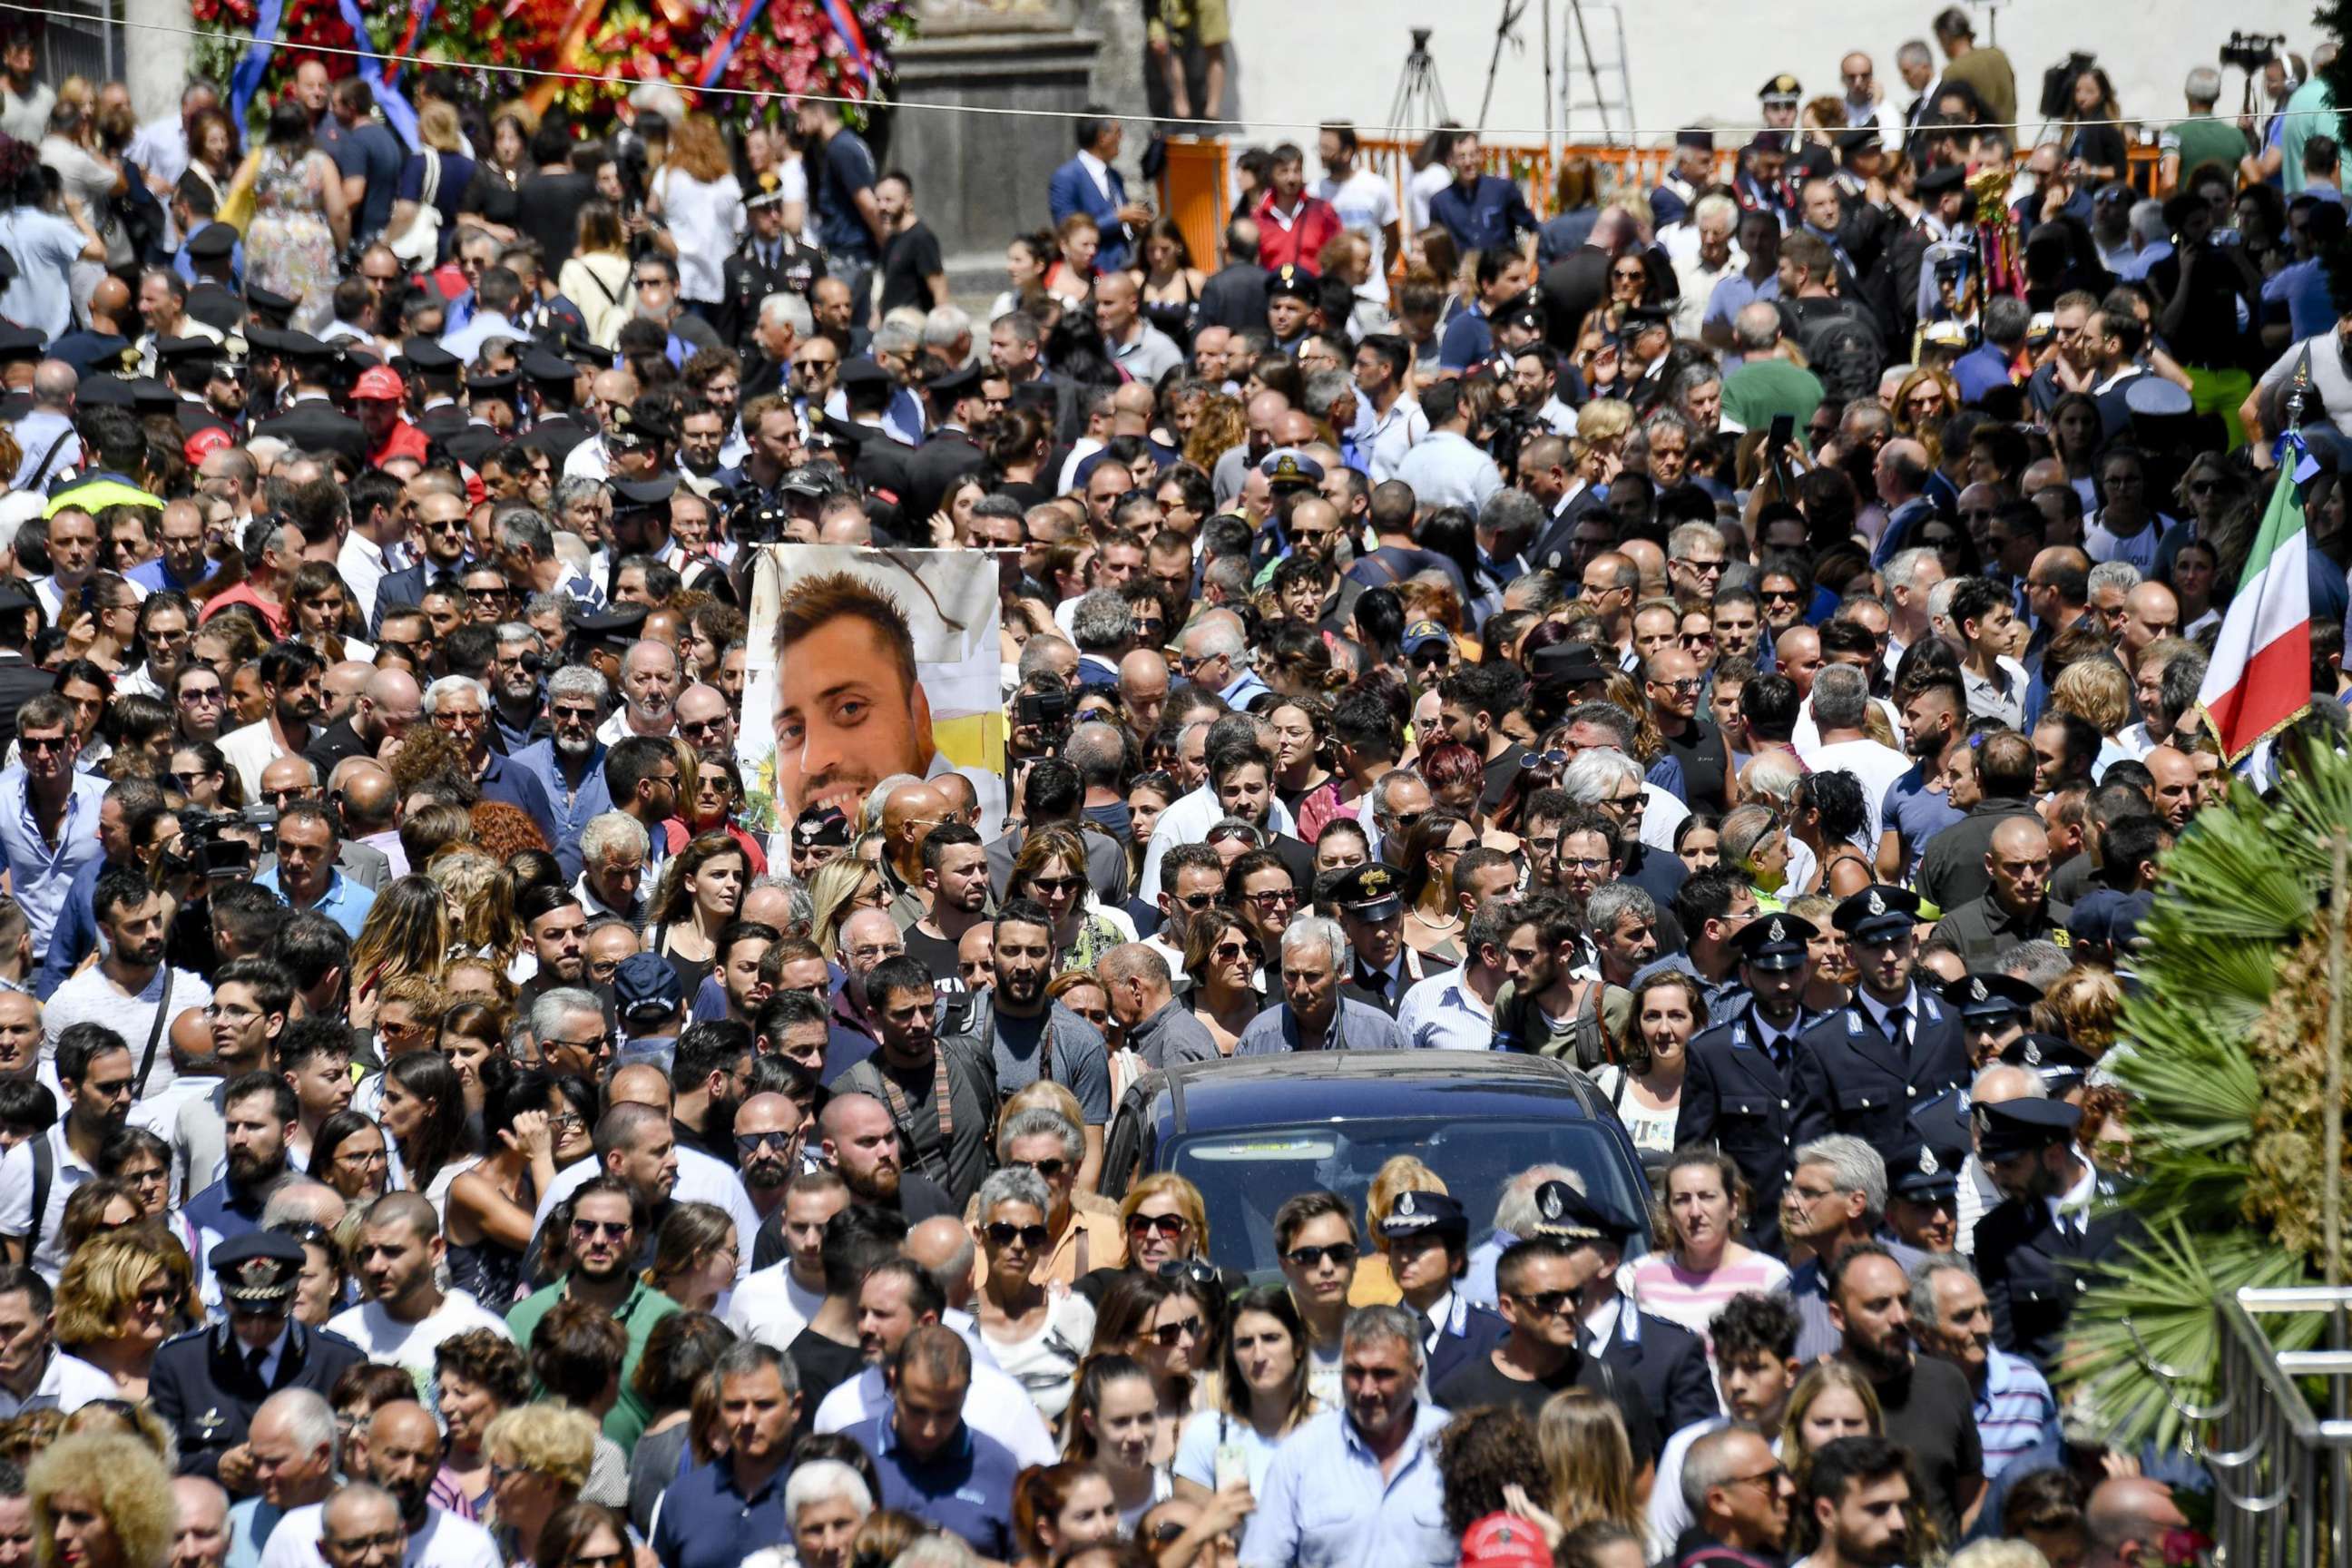 PHOTO: A photograph of Carabinieri officer Mario Cerciello Rega is carried during his funeral in his hometown of Somma Vesuviana in southern Italy, July 29, 2019.